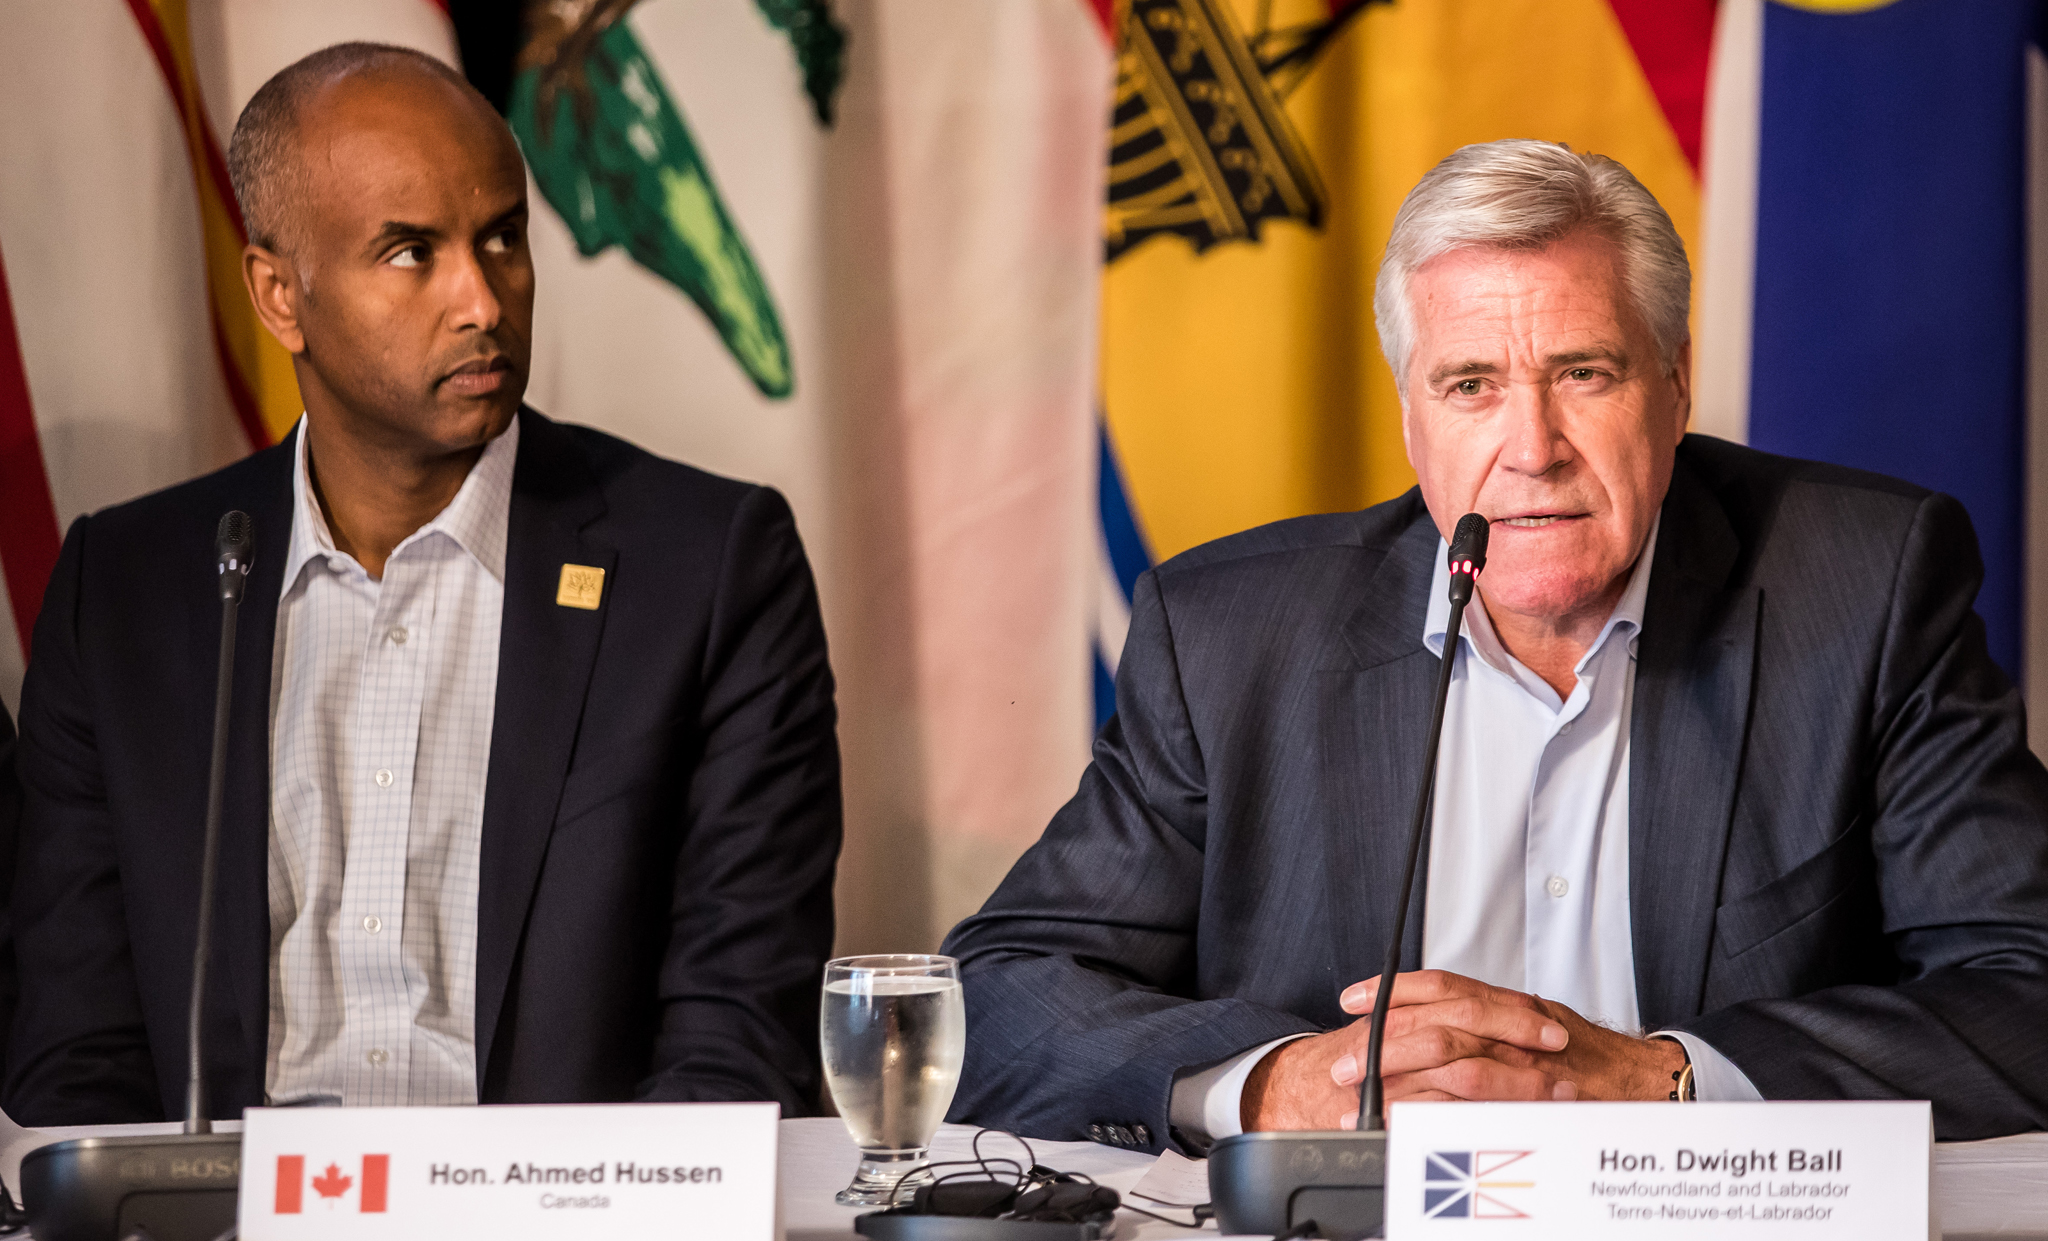 July 11, 2017 - Minister of Immigration, Refugees and Citizenship Ahmed Hussen and Newfoundland and Labrador Premier Dwight Ball meet with media at the close of the July 11, 2017, Atlantic Growth Strategy meeting in Humber Valley, NL.